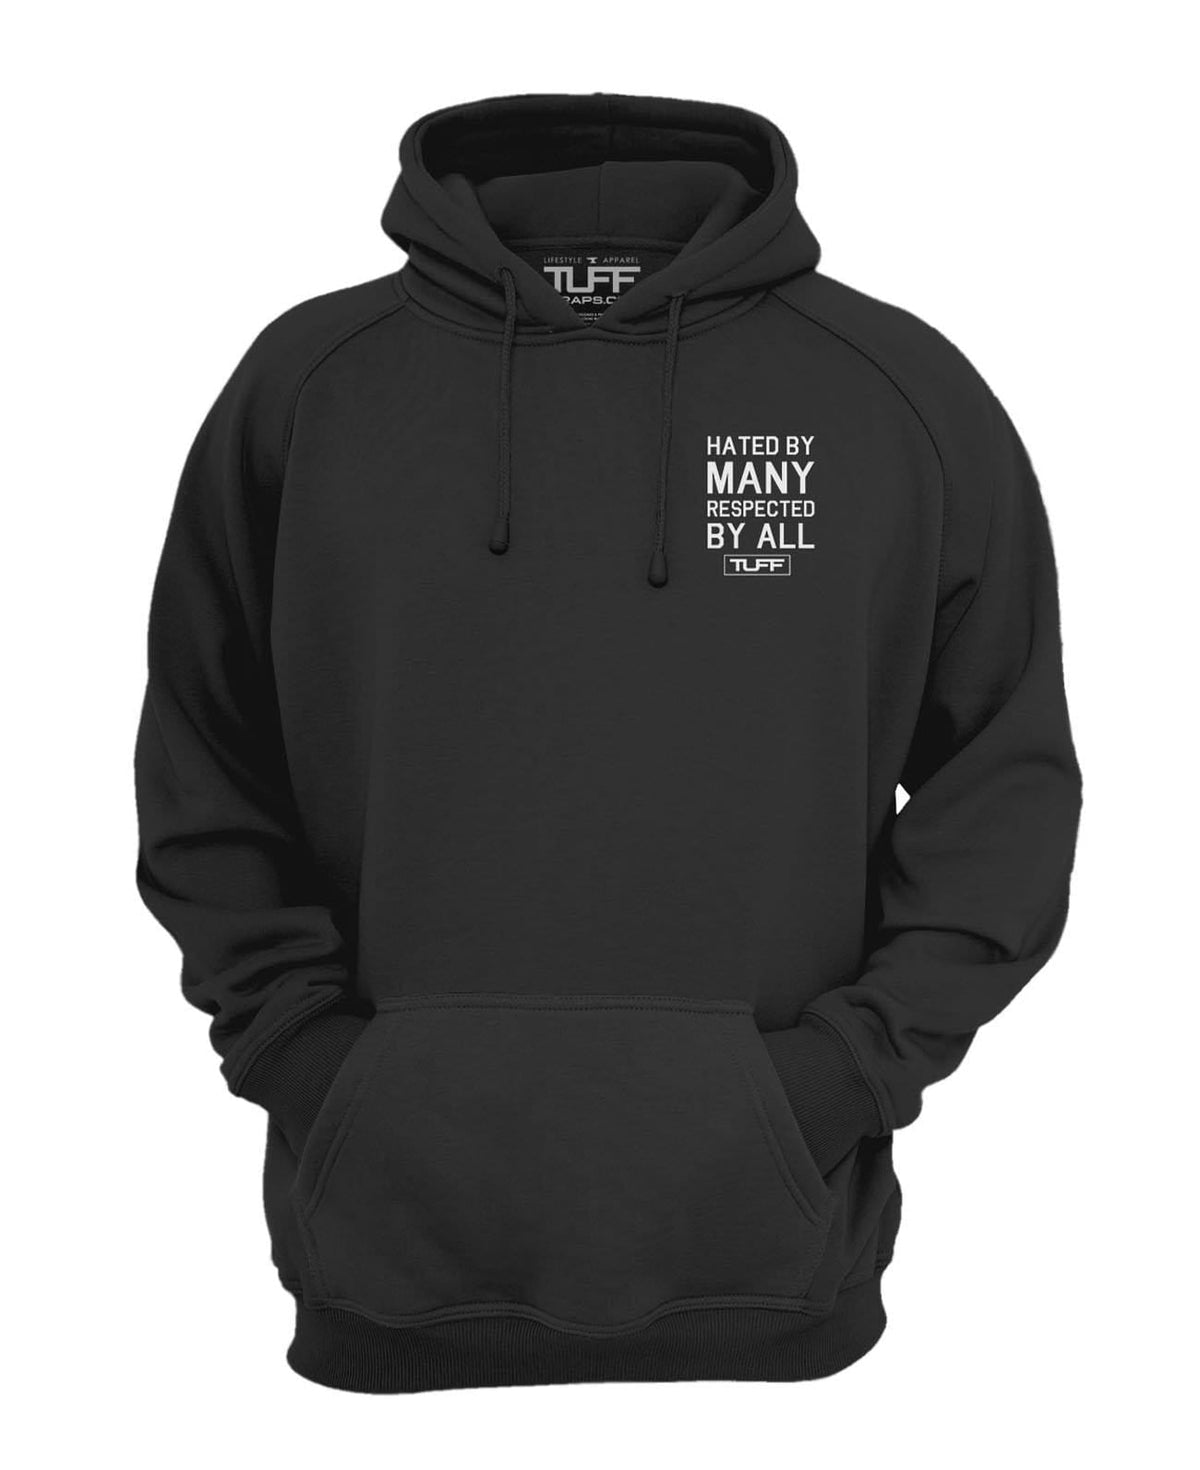 Hated By Many, Respected By All Hooded Sweatshirt TuffWraps.com